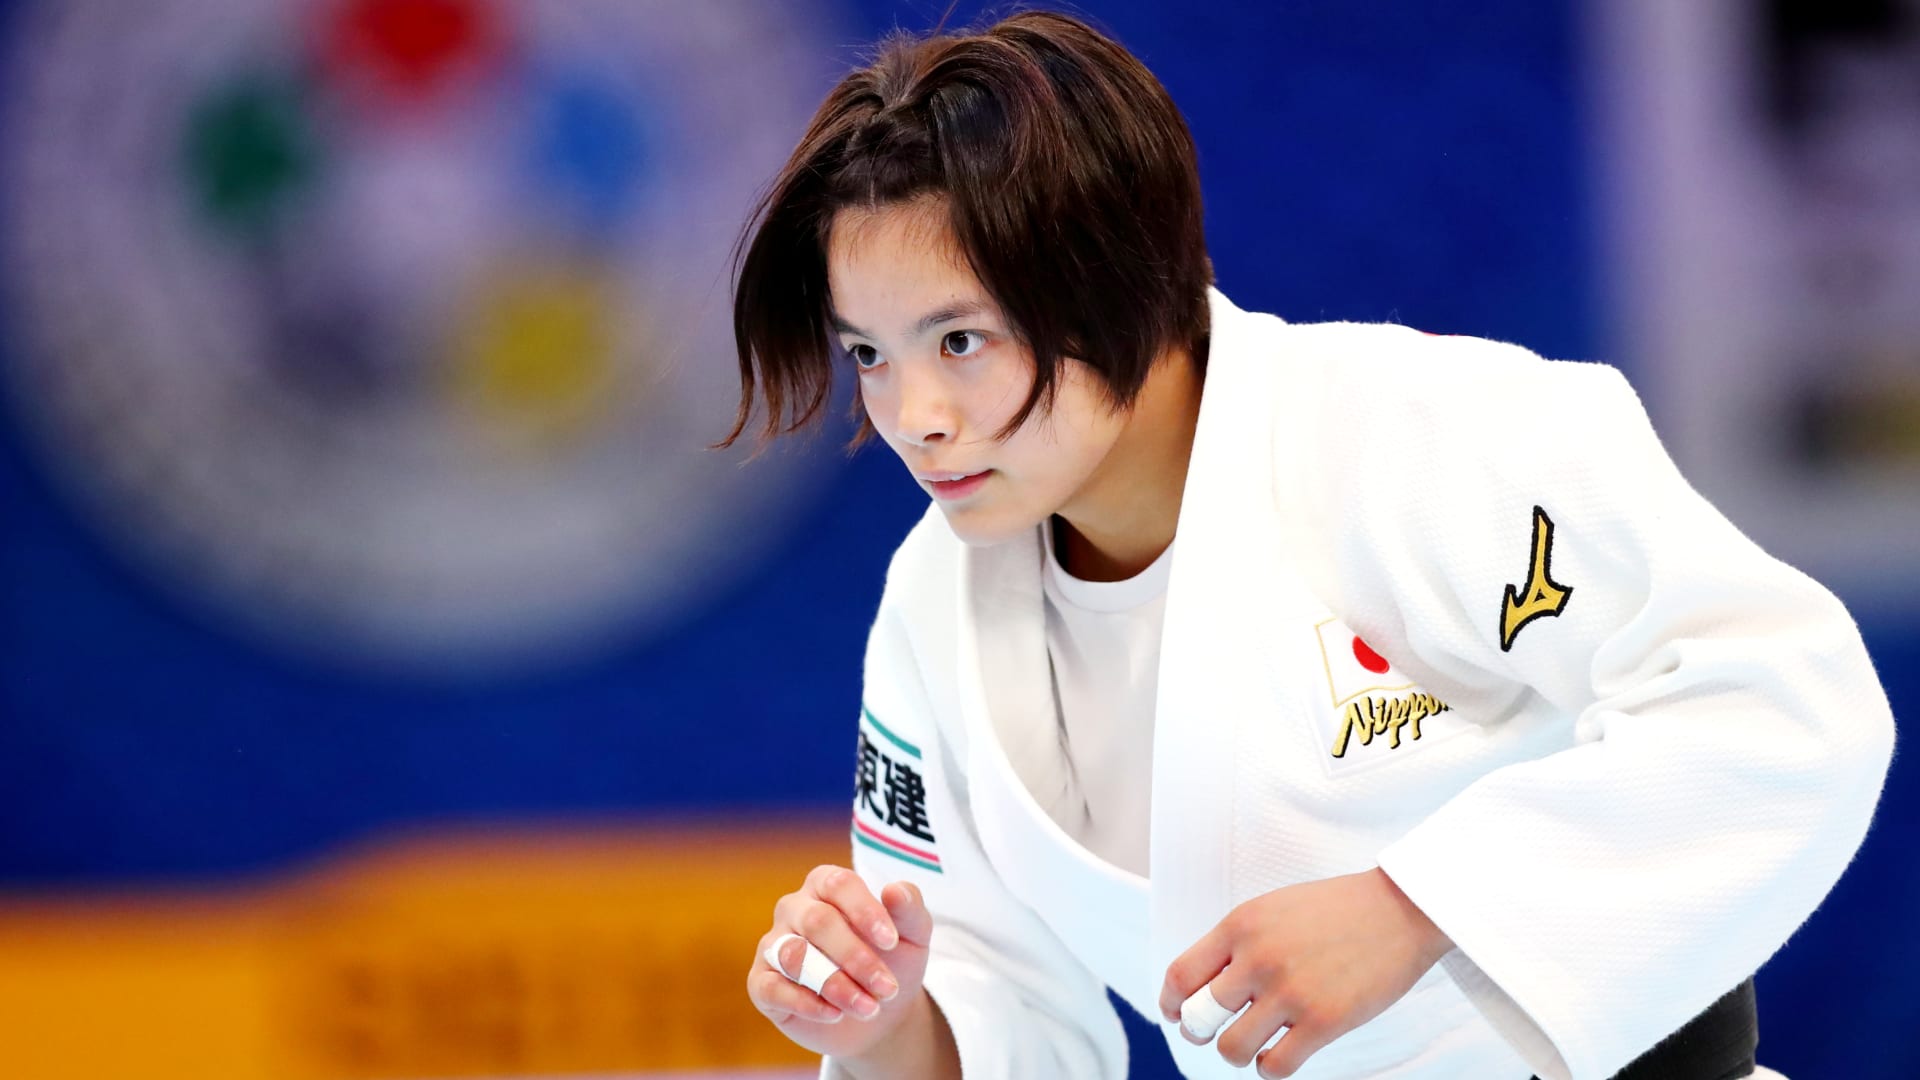 Medal bonanza for Japan on Day 2 of the 2019 Judo World Championships